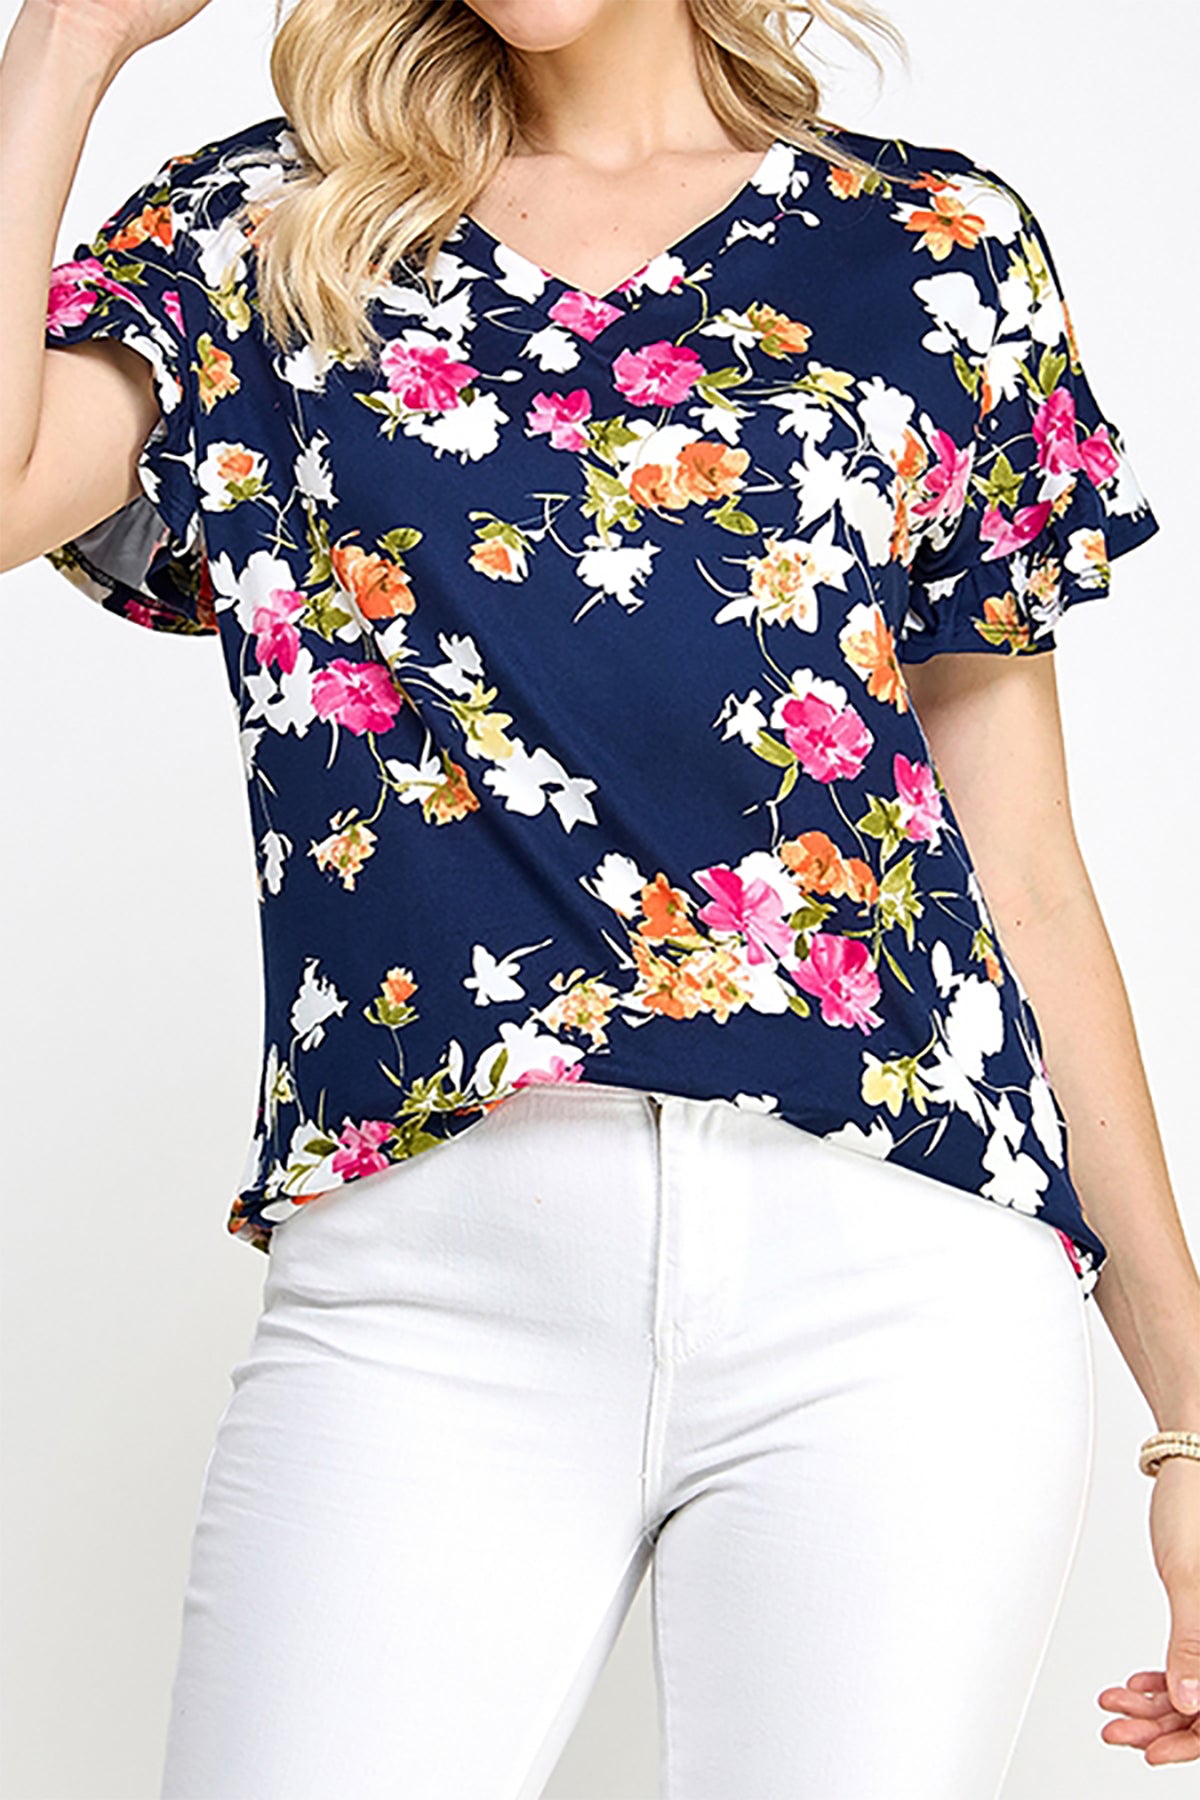 RELAX FIT RUFFLE SLEEVE V NECK FLORAL KNIT TOP 2-2-2-2